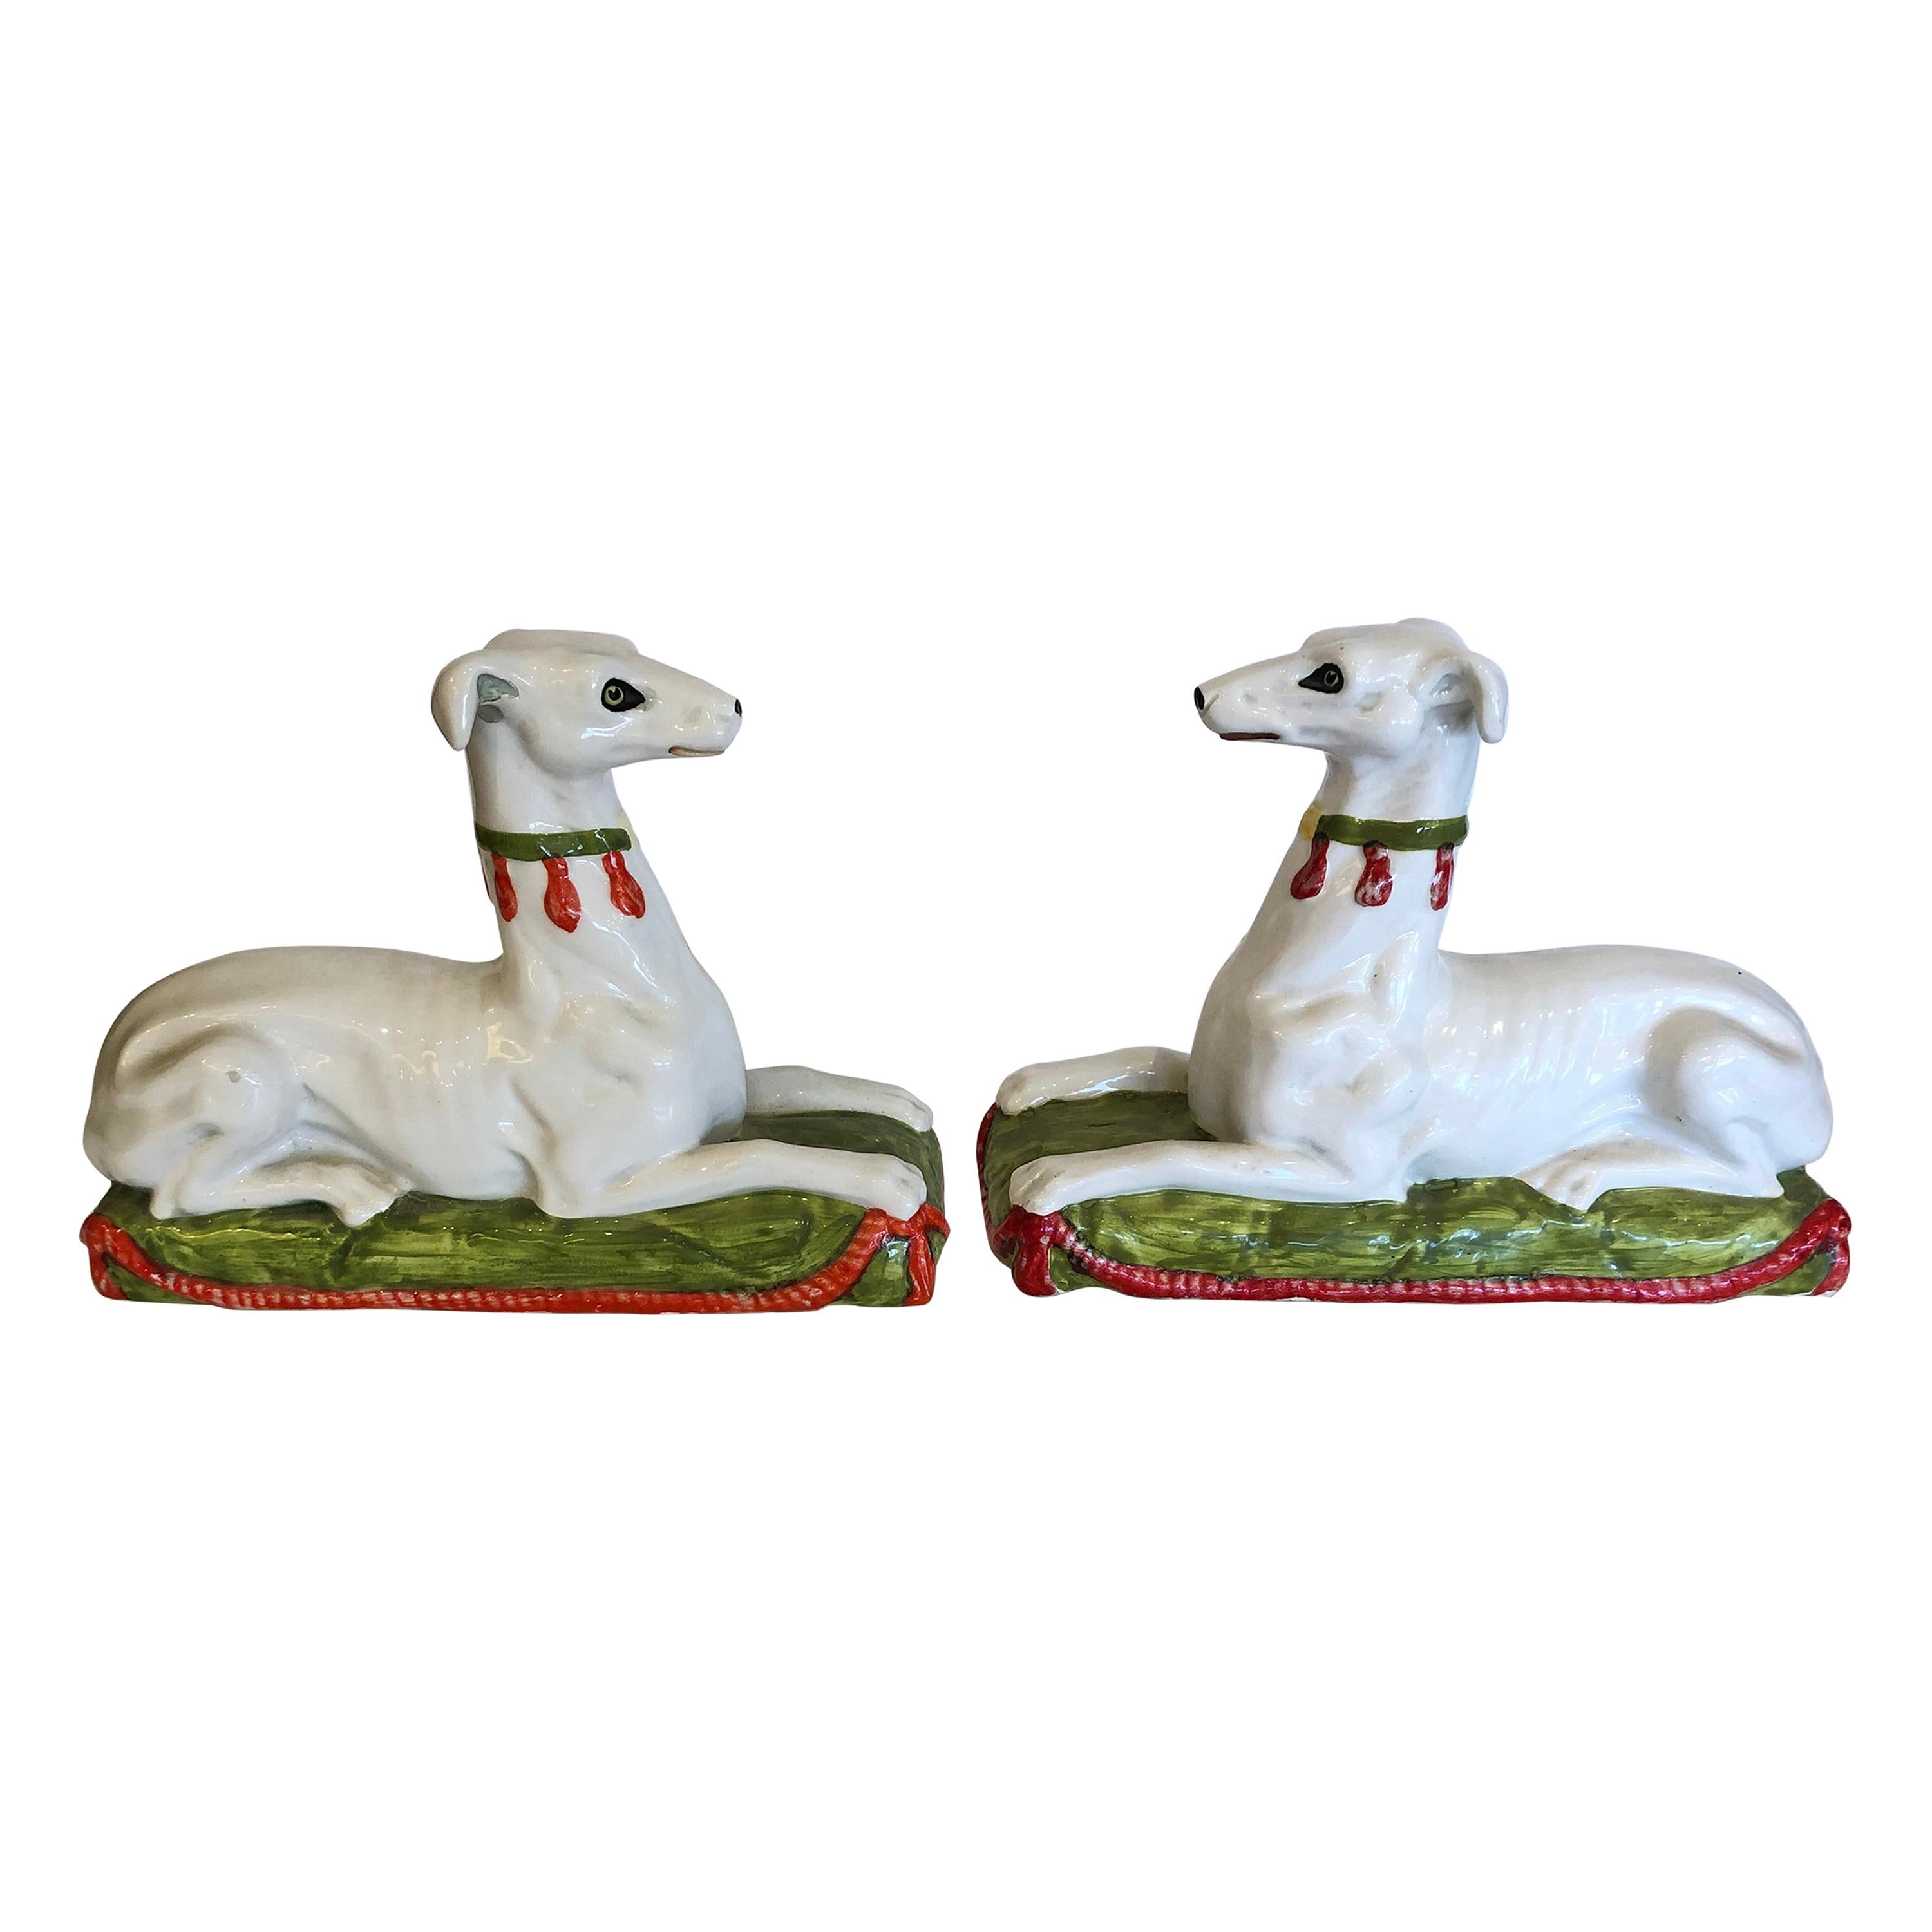 Striking Unusual Pair of Italian Ceramic Recument Whippets Greyhounds Sculptures